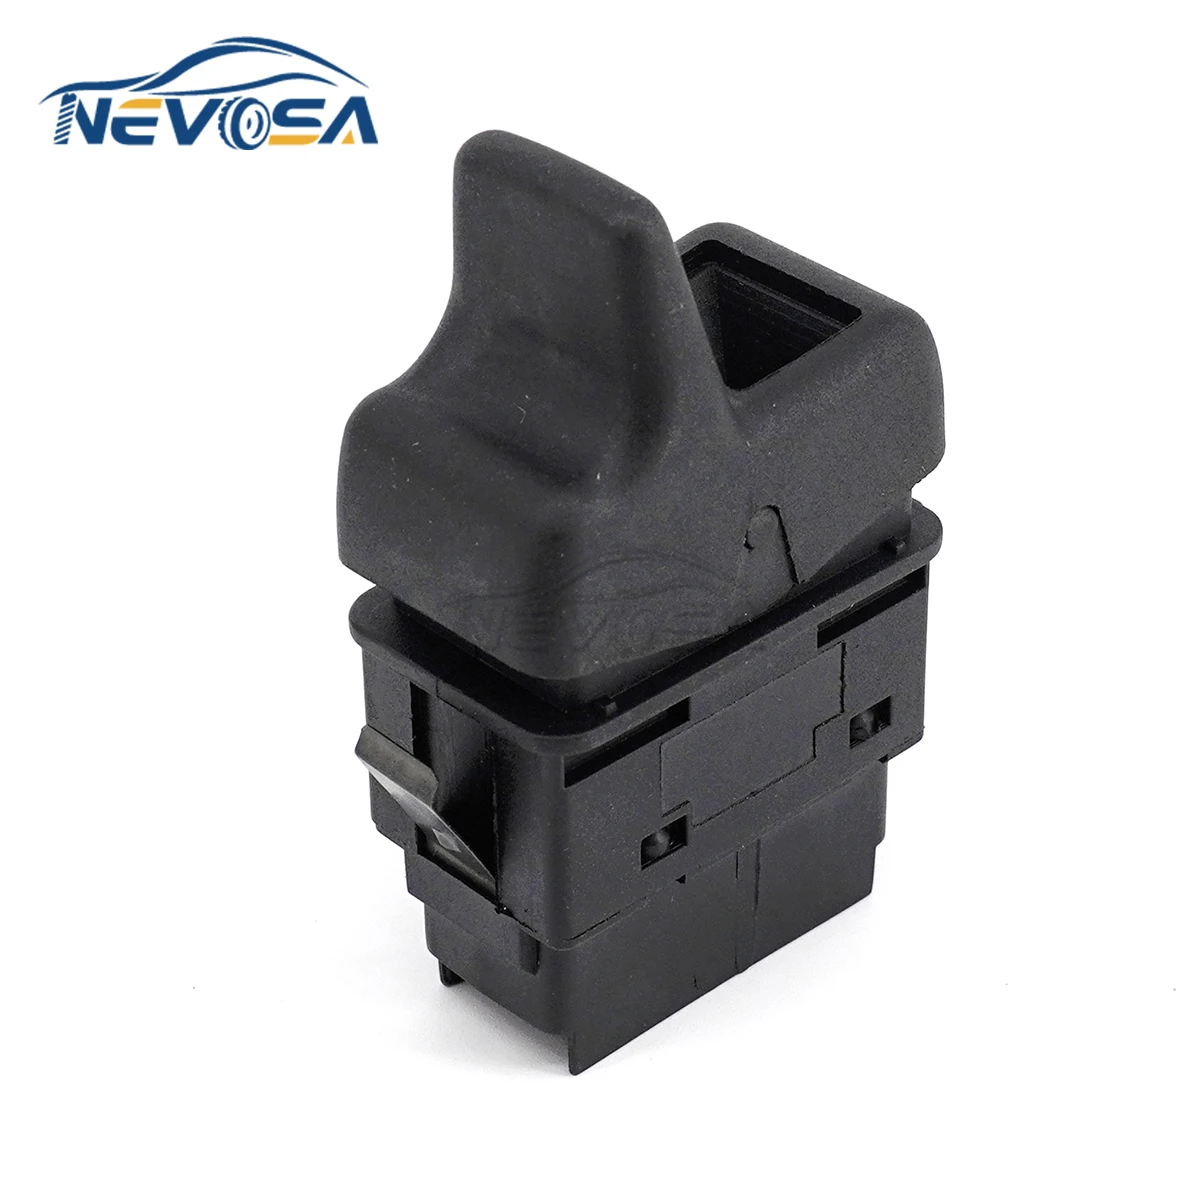 NEVOSA  8157761 Window Control Switch Regulator For Volvo FH FM Truck Car Parts Replacement 1099786